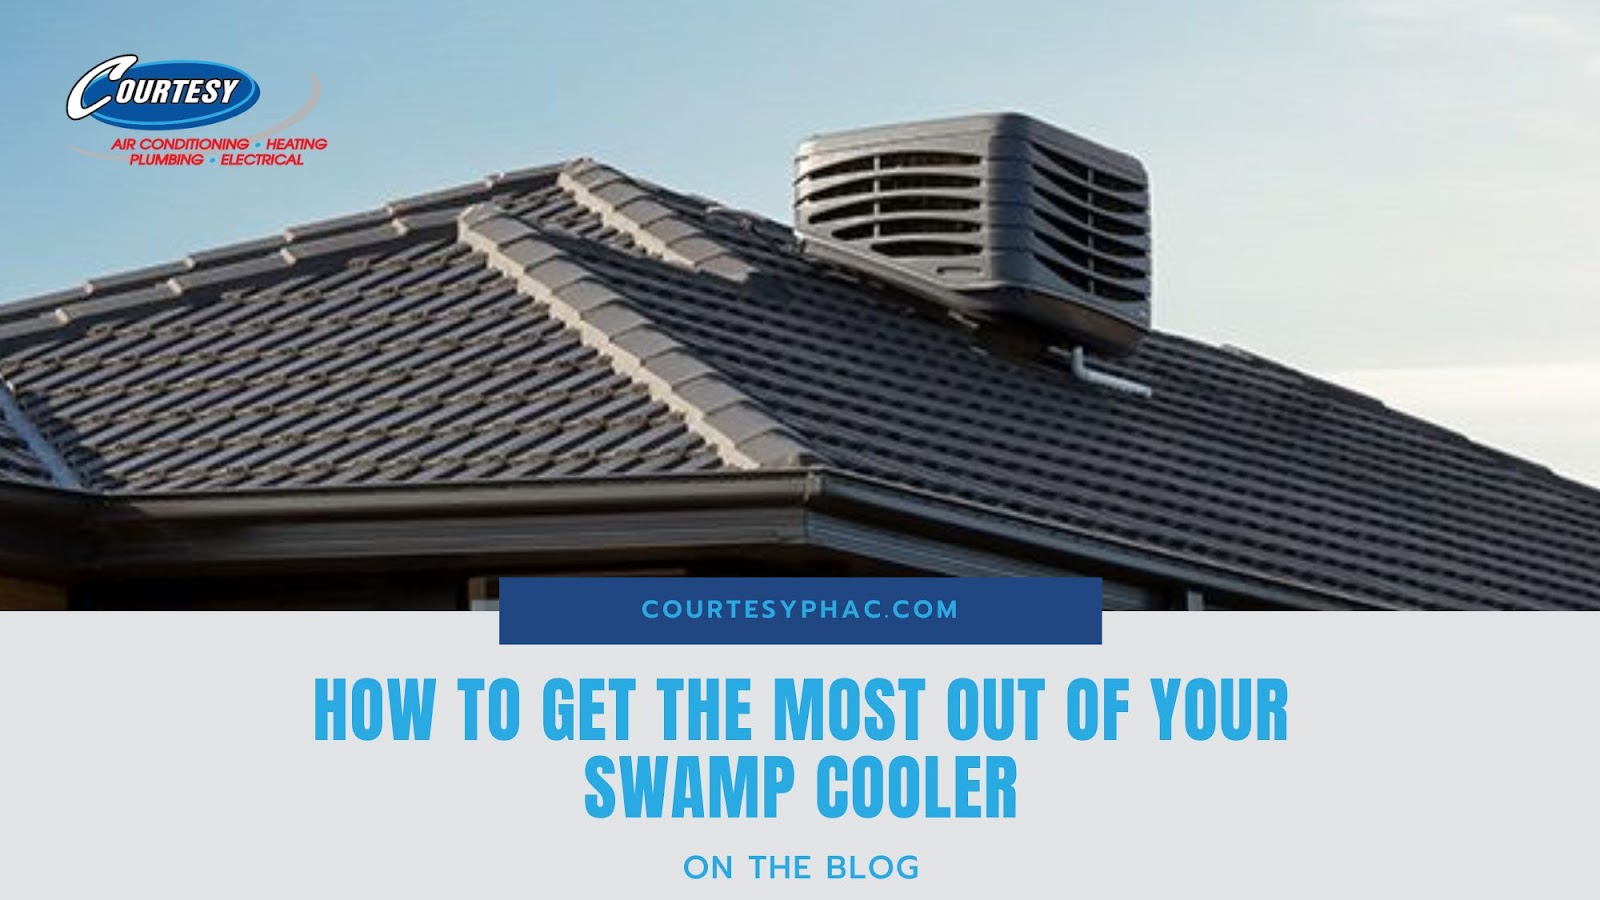 How to Get the Most Out of Your Swamp Cooler